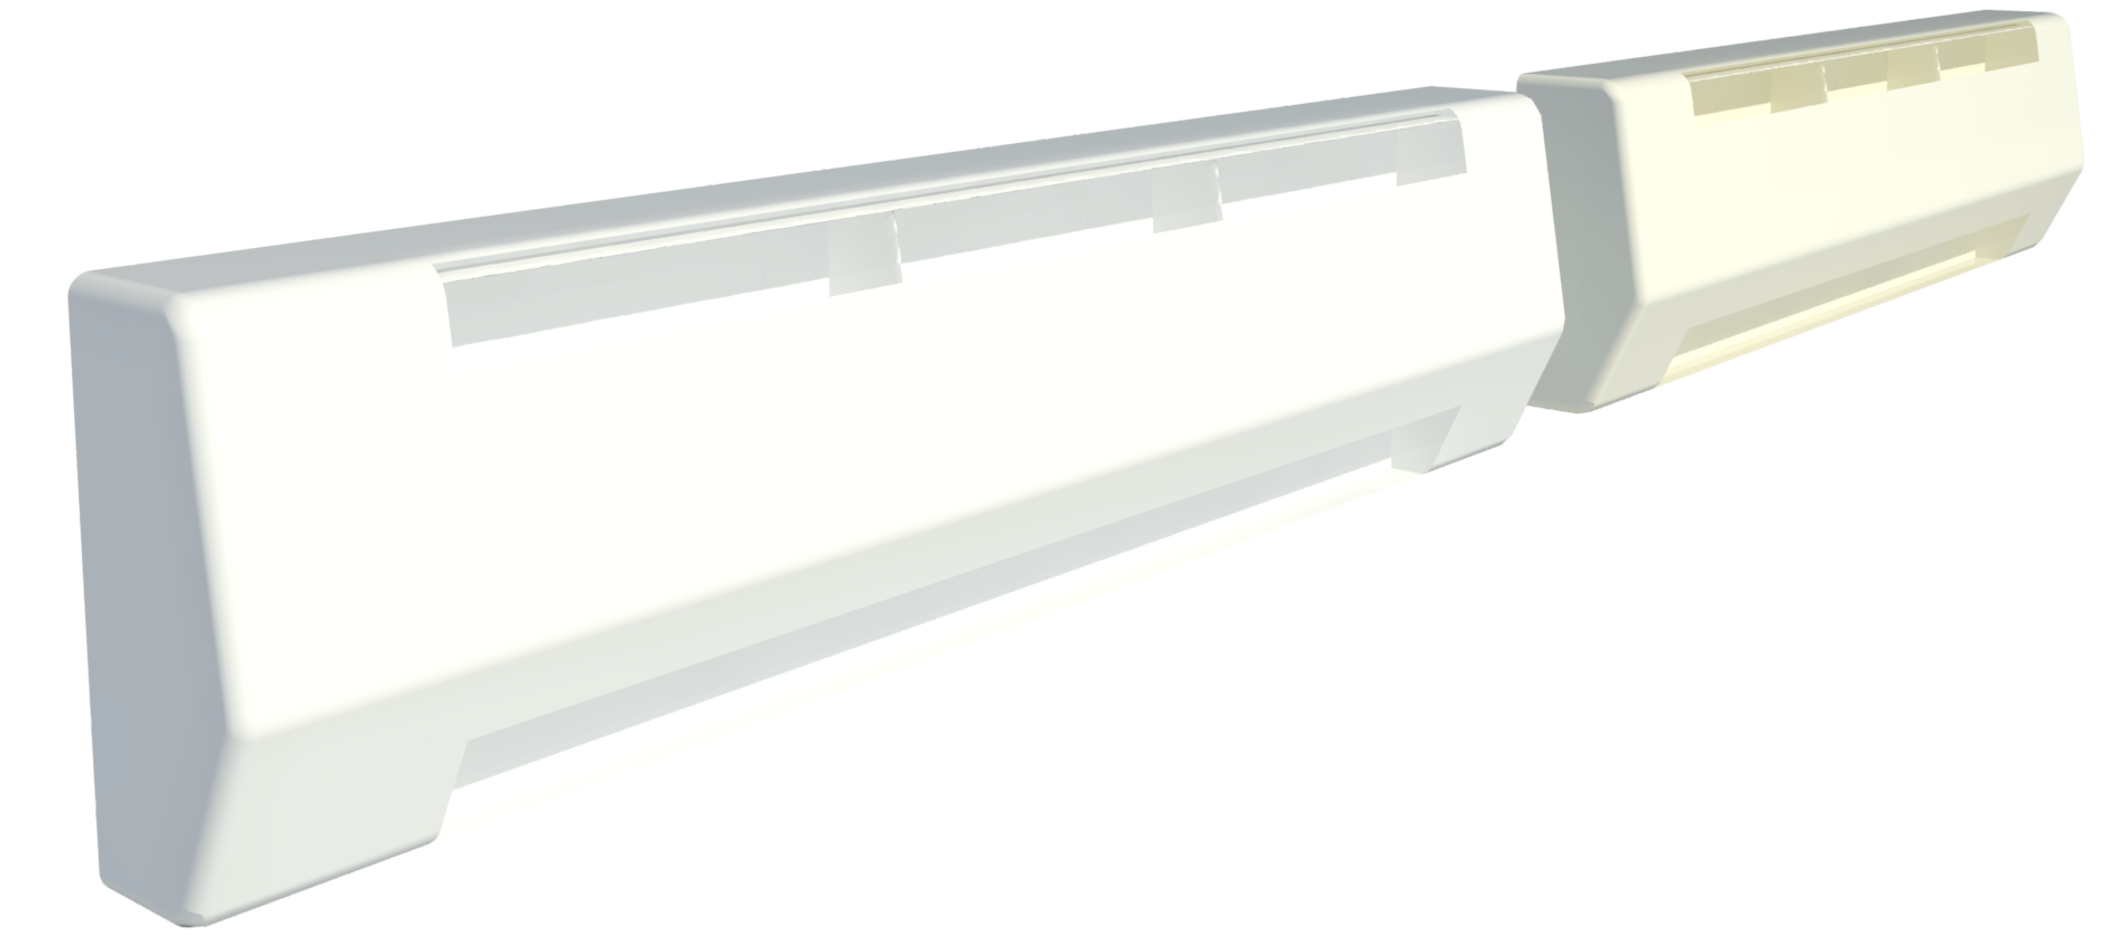 Render of the wall-mounted baseboard heaters from manufacturer King, in two colours - white and a beige, almond finish